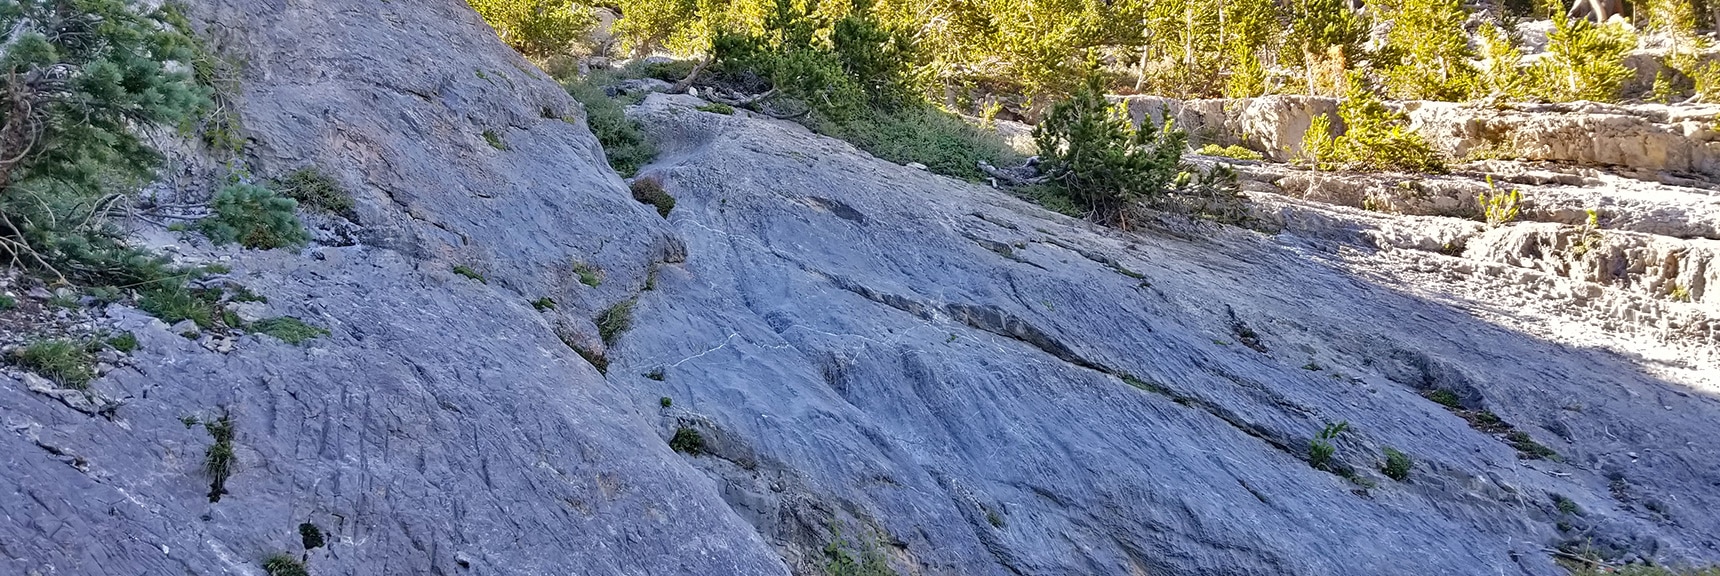 Arrival at 2nd Major Barrier. More Gentle and Firm Ascent. Class 3. | Mummy Mountain Summit Approach from Lee Canyon | Mt. Charleston Wilderness | Spring Mountains, Nevada